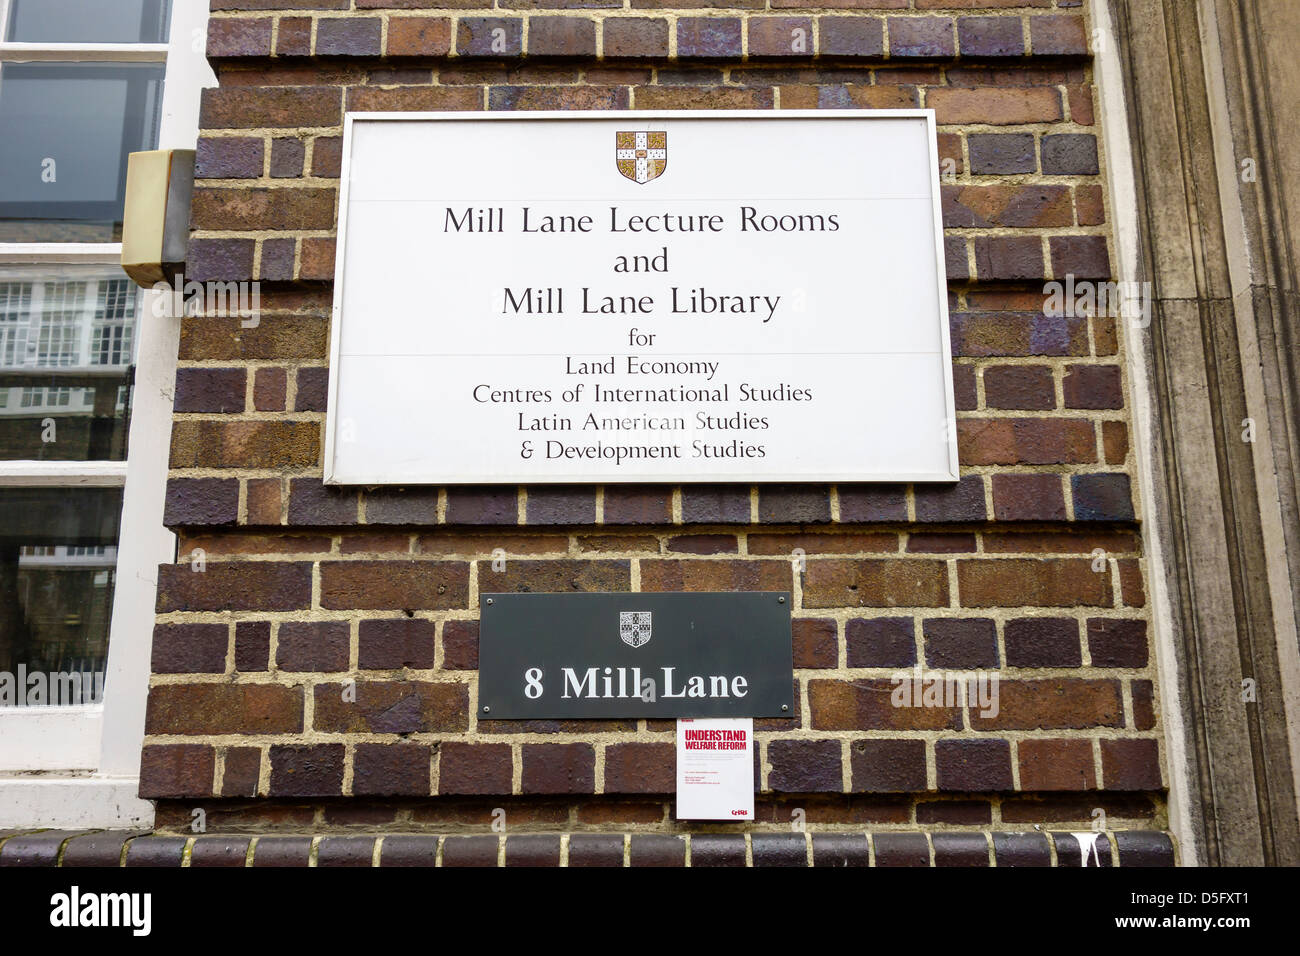 Cambridge England Mill lane Lecture Room & Library Stock Photo